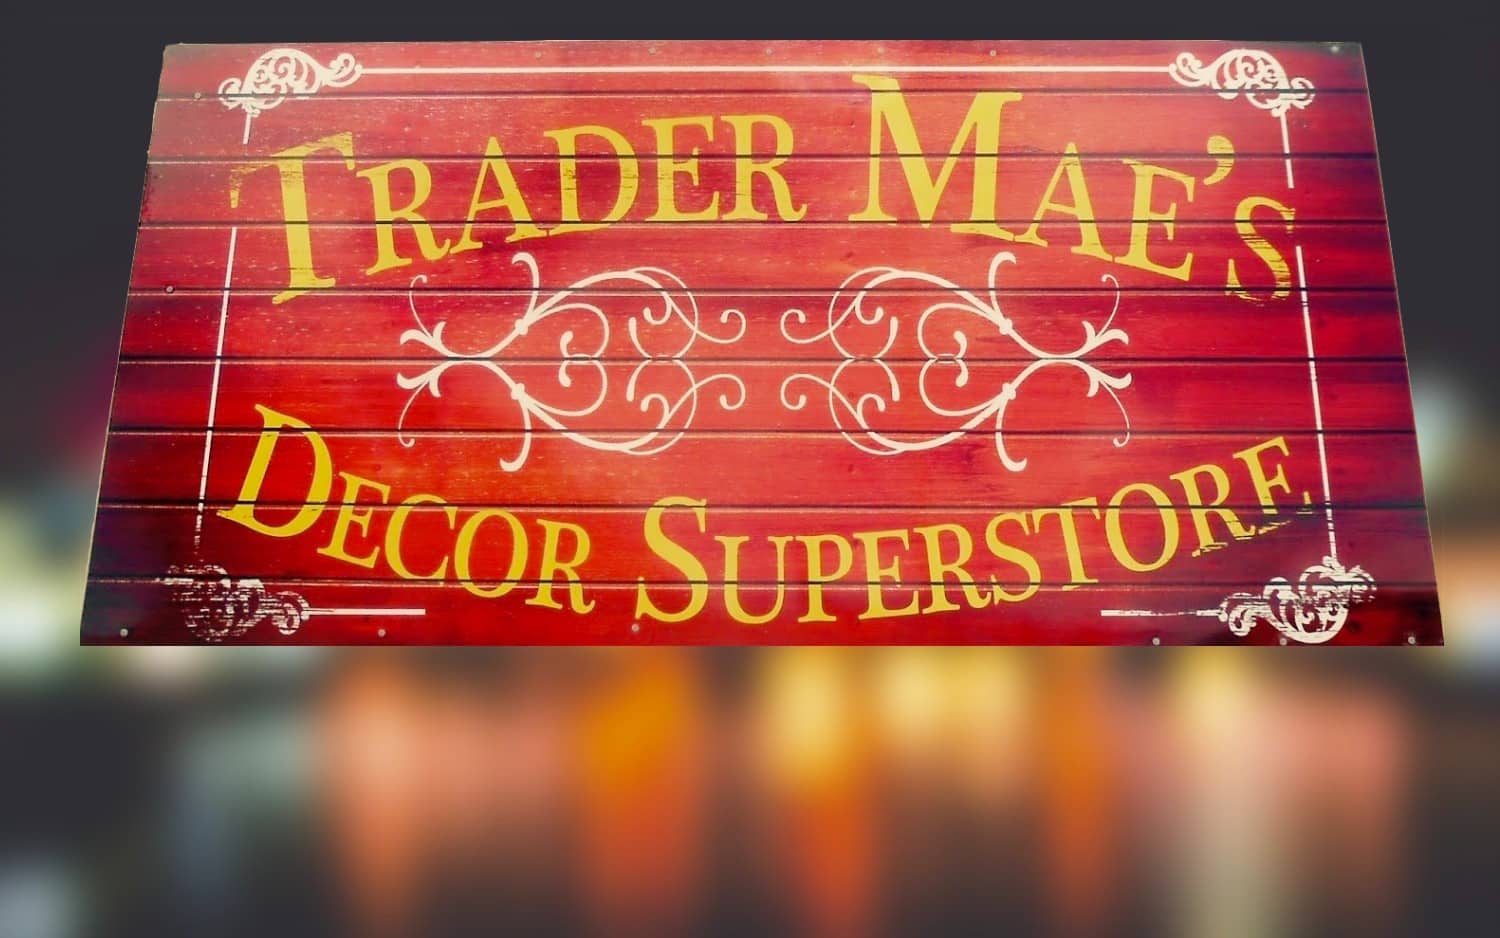 Trader Mae's: Antique Shopping is Alive in Orlando